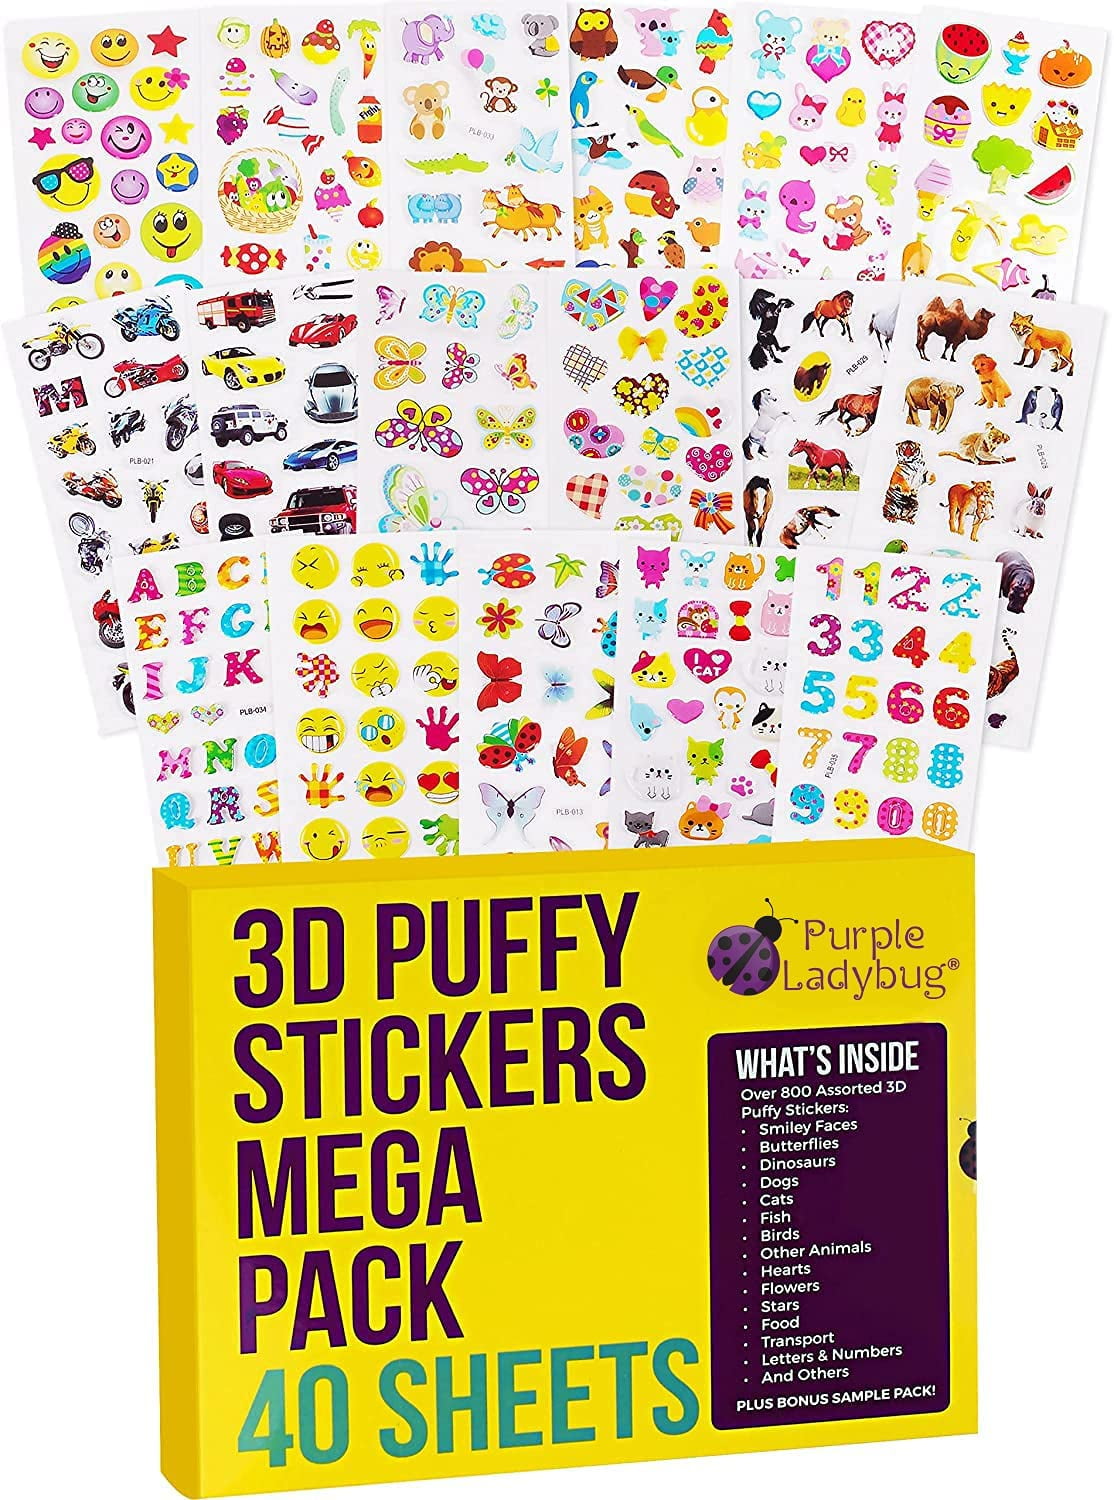 40 Assorted Sticker Sheets with 950+ Cute Stickers in Bulk Purple Ladybug 3D Puffy Stickers for Kids & Toddlers Mega Variety Pack Animals Alphabet and More! Includes Stars Cars